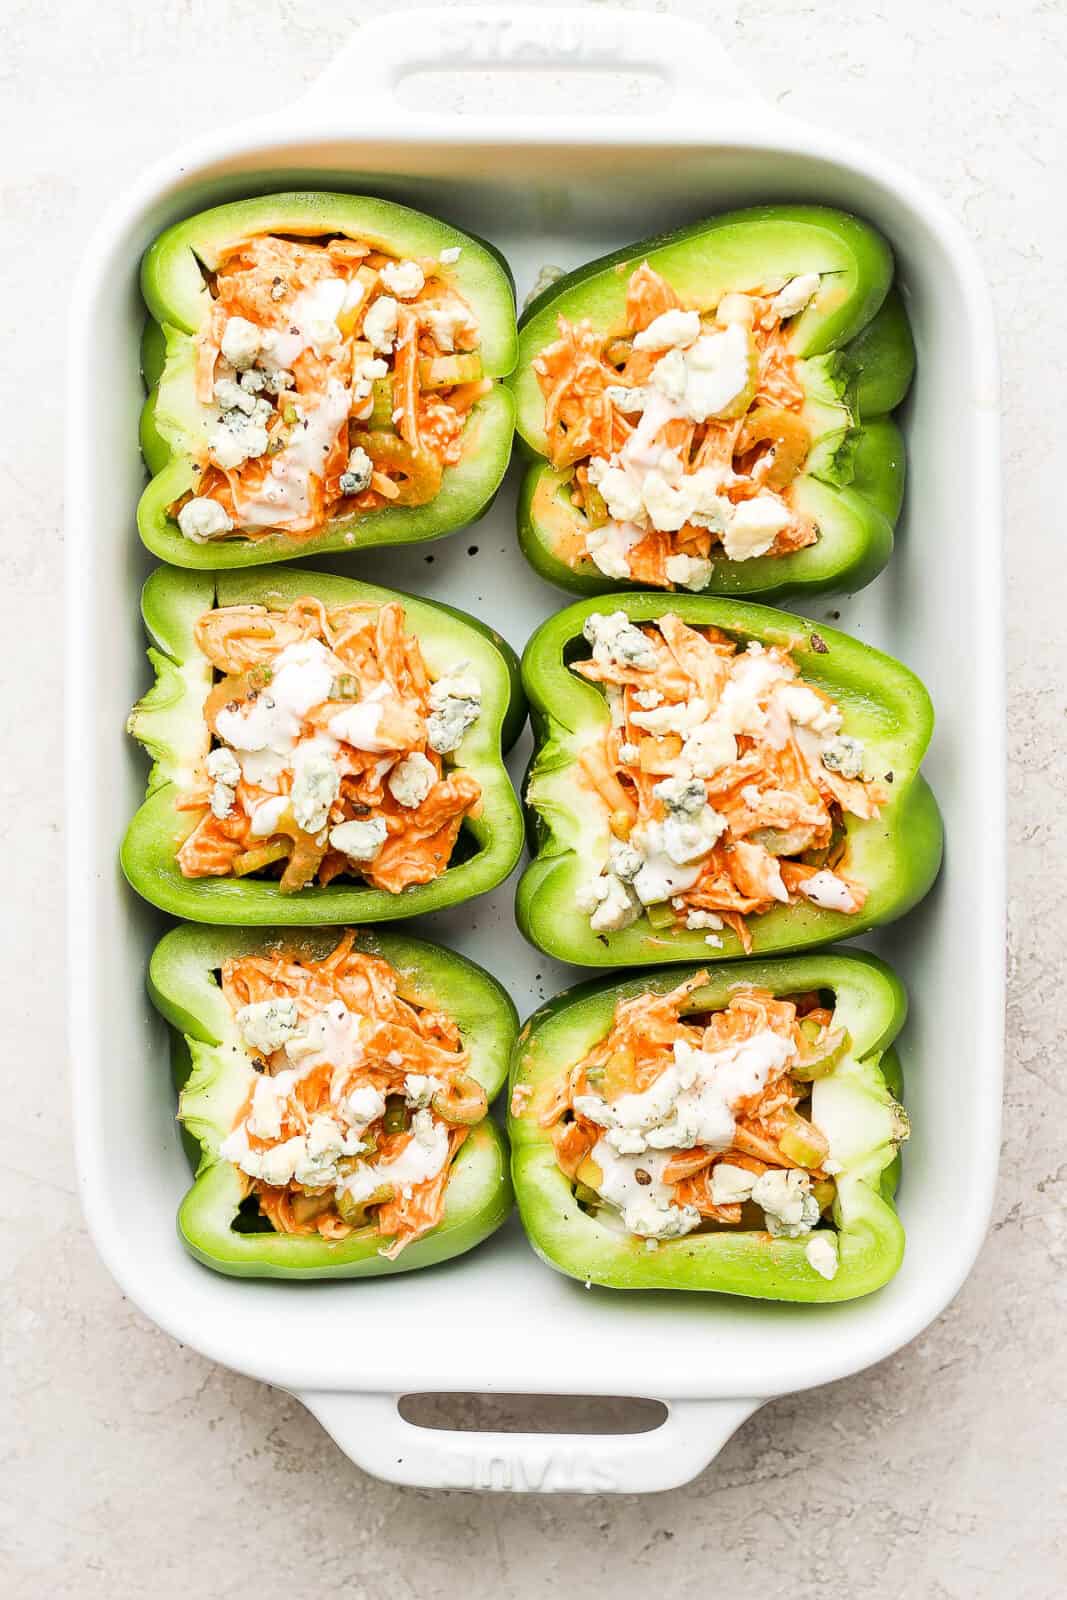 The stuffed peppers in a baking dish.